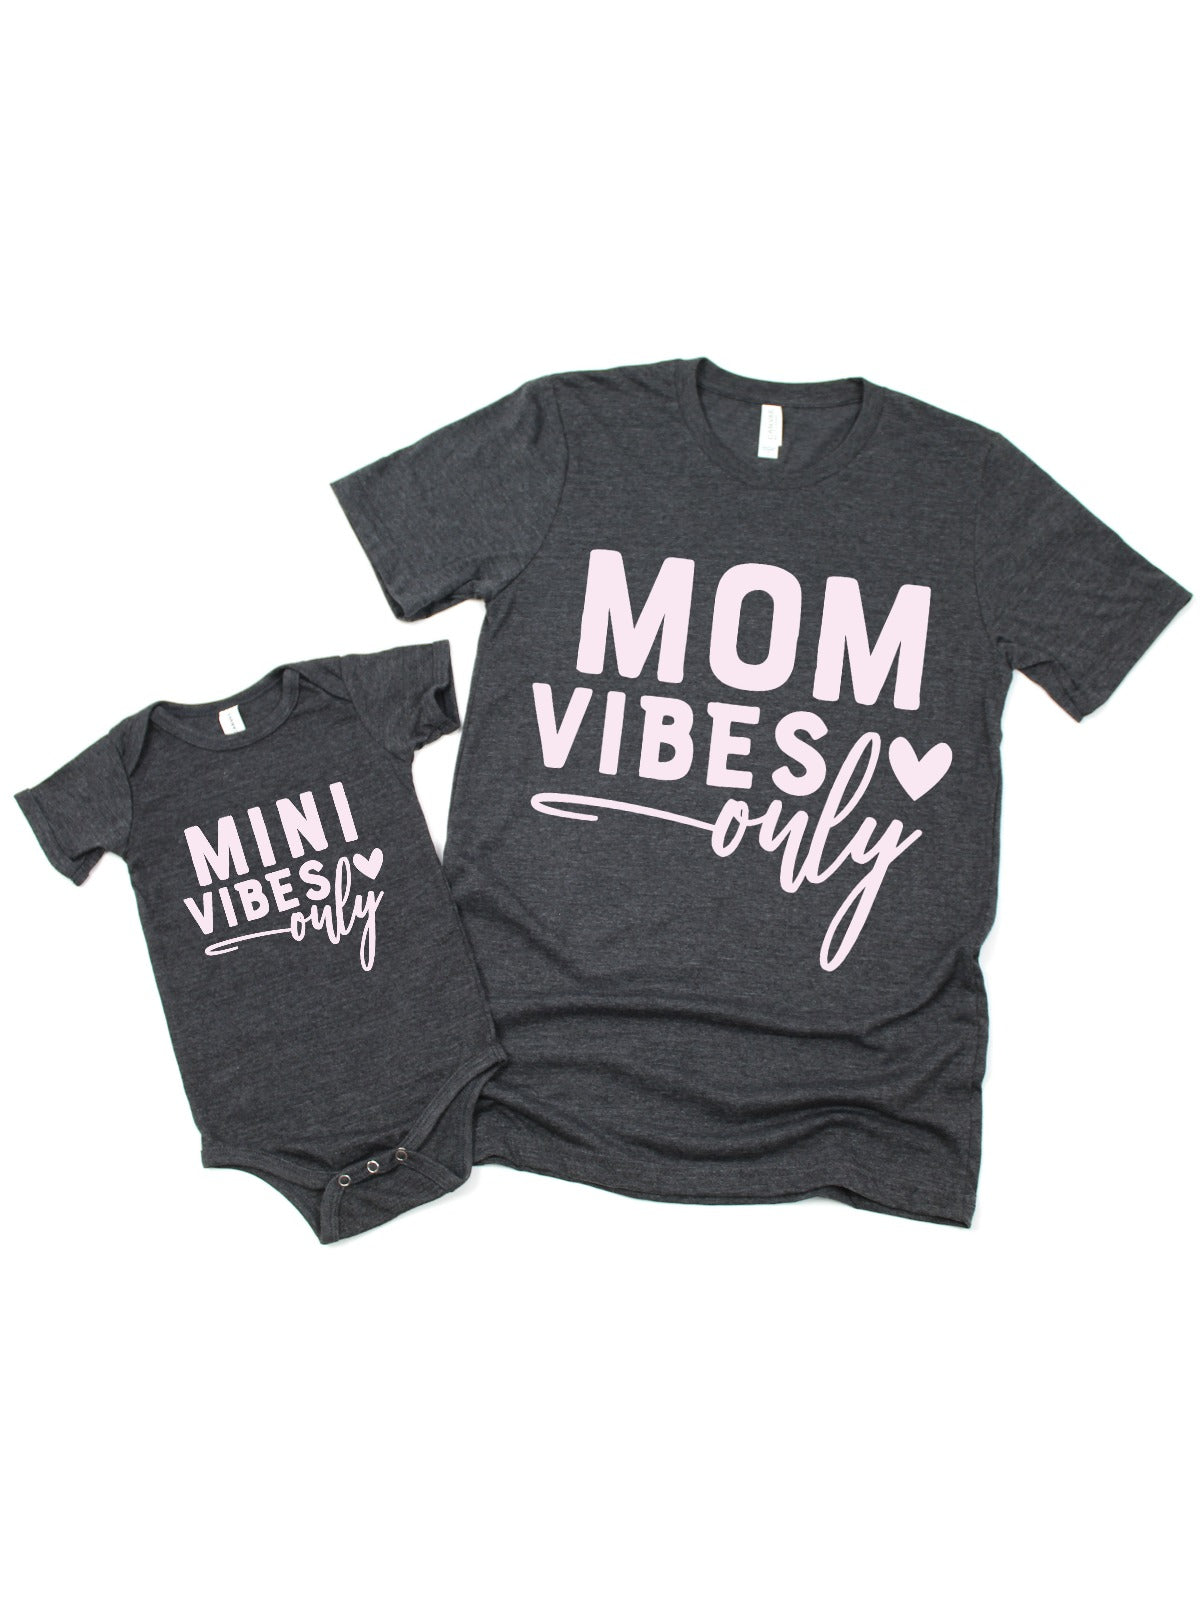 Mom Vibes Only | Mini Vibes Only